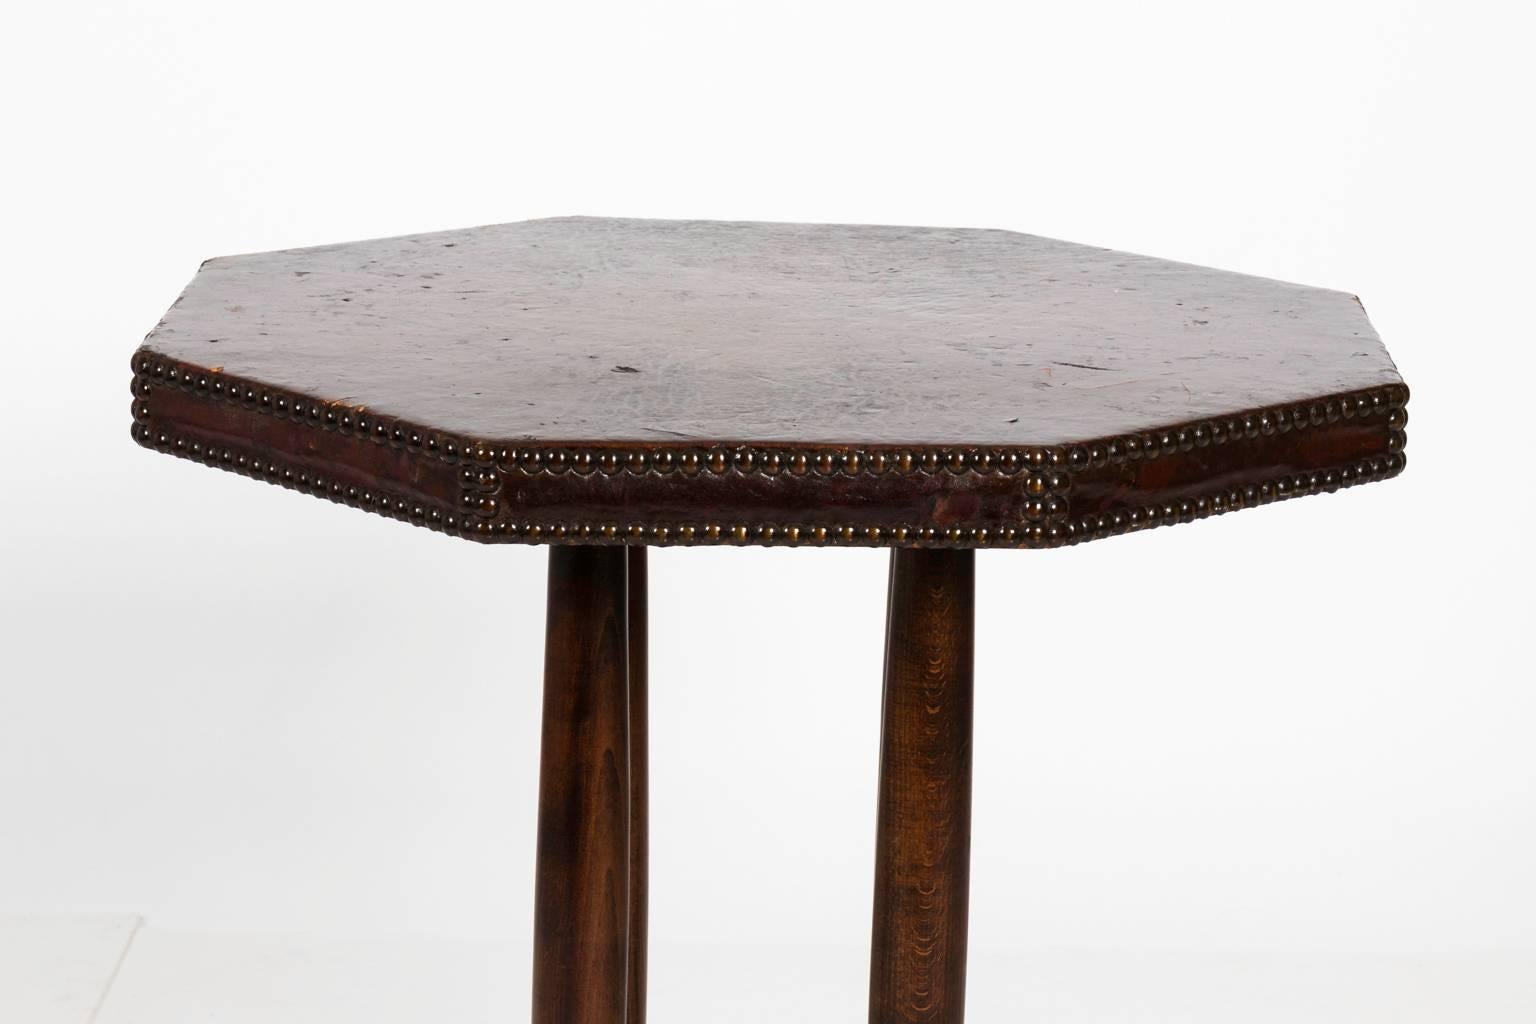 French Art Deco table that features a leather top with brass head trim, circa early 20th century. There is minor wear on the leather top.